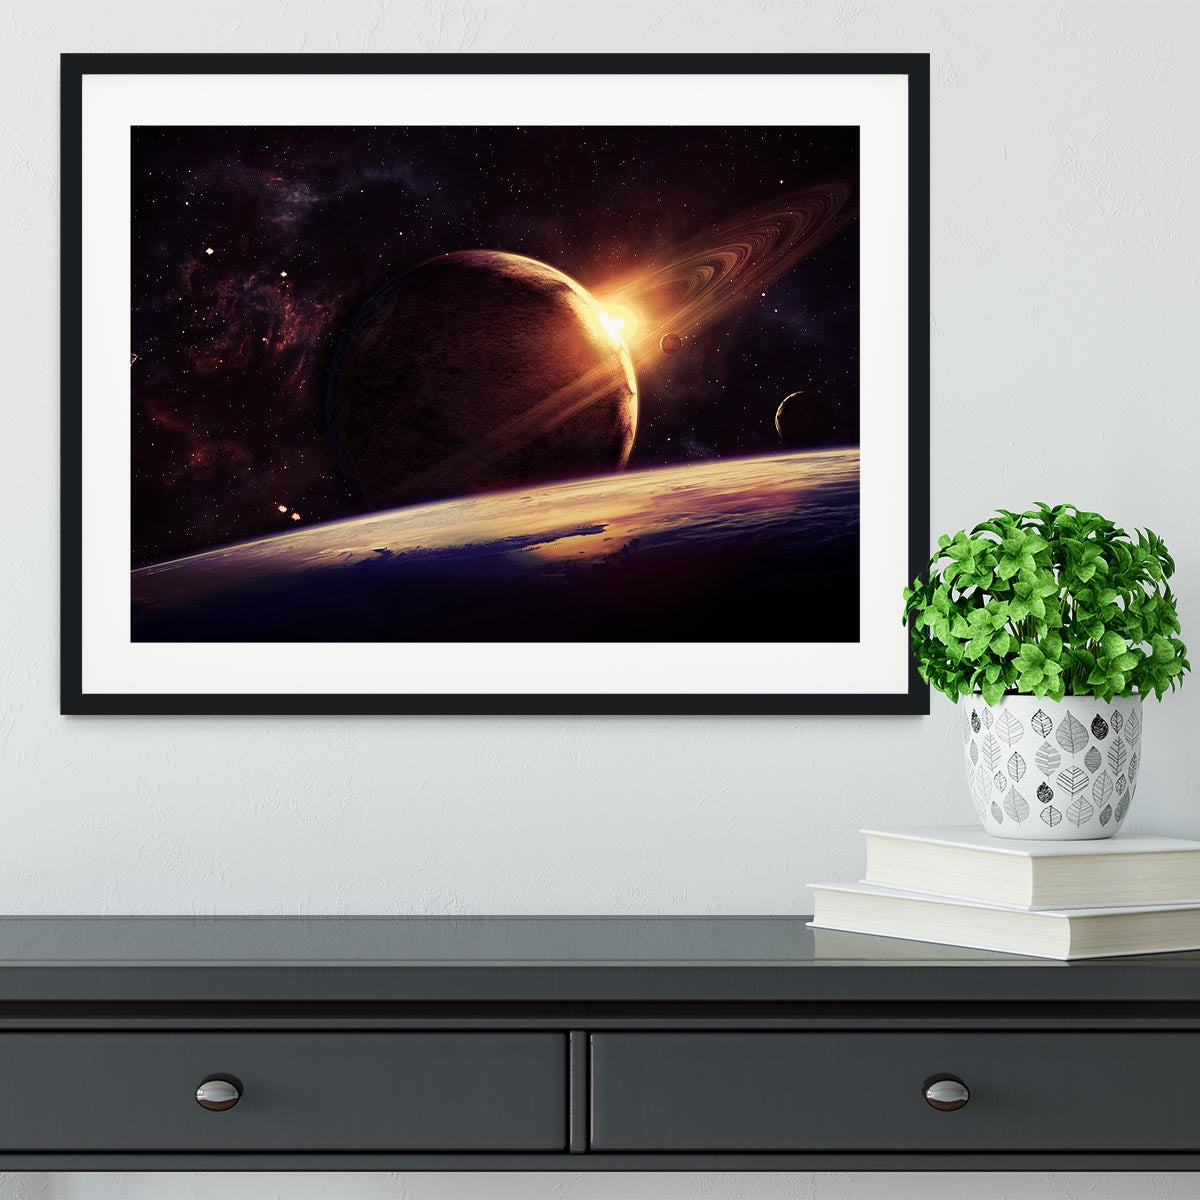 Planets over the nebulae in space Framed Print - Canvas Art Rocks - 1